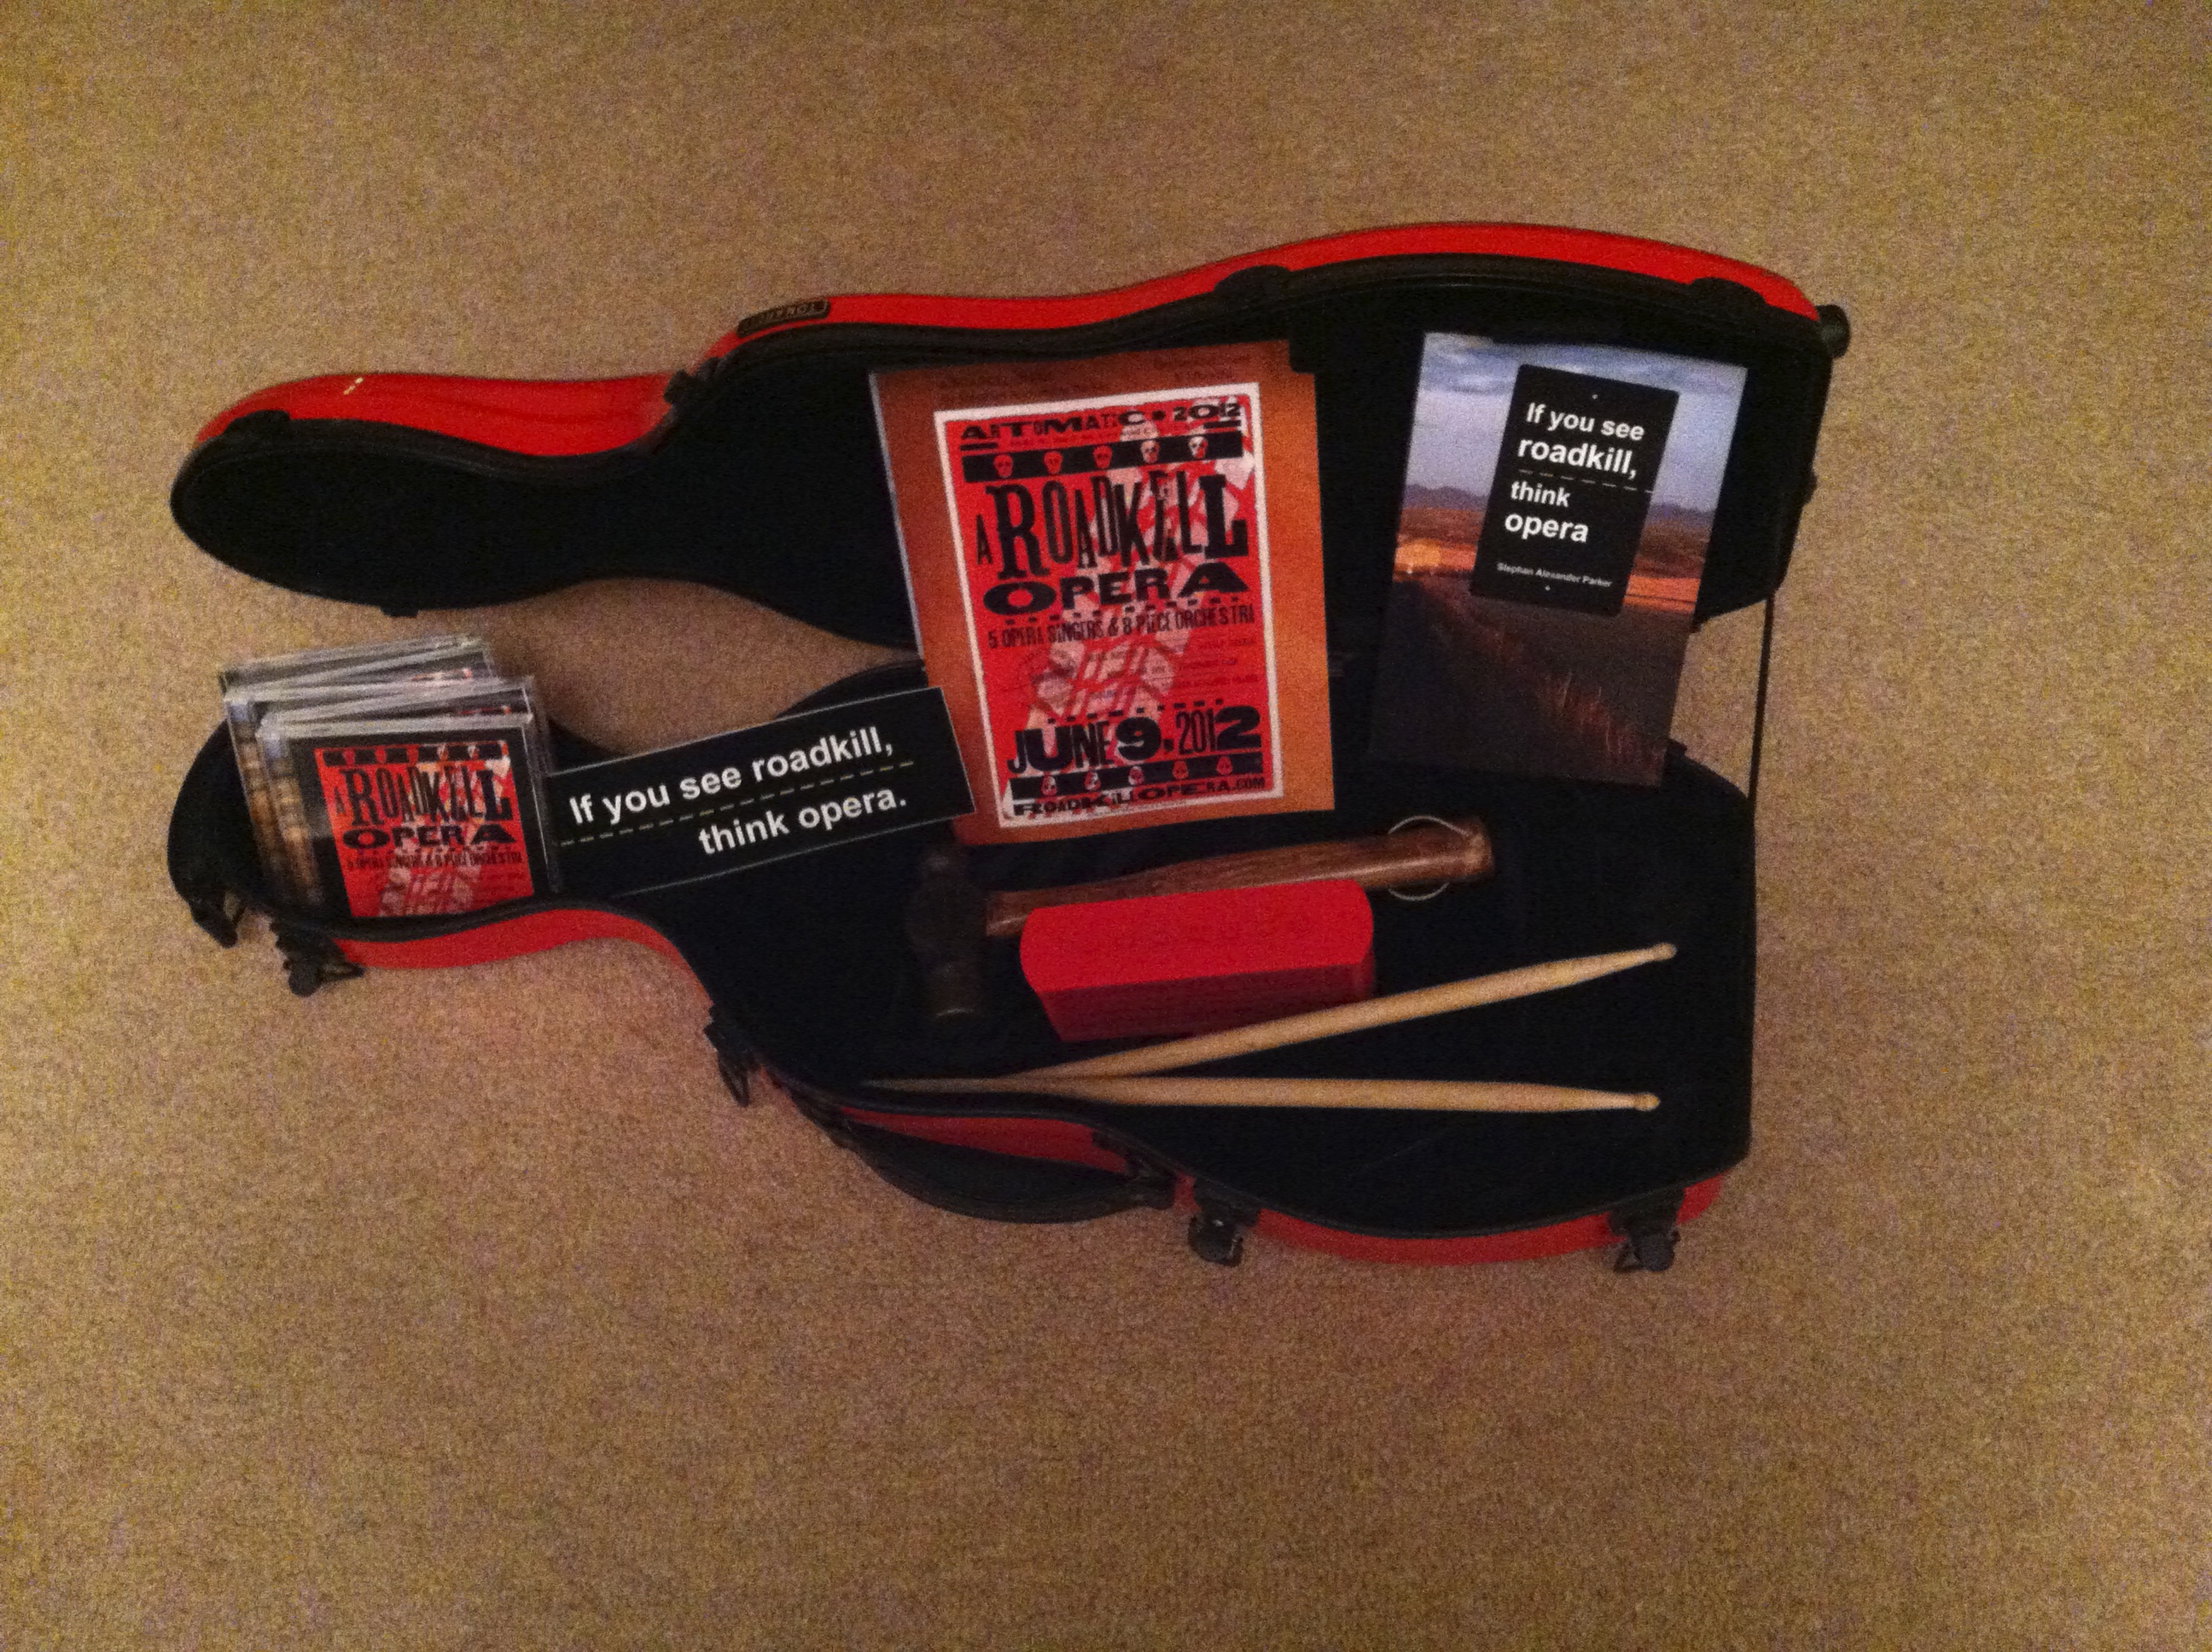 Photo of A viola case is used for transporting and displaying the CD and books associated with A Roadkill Opera and If You See Roadkill, Think Opera